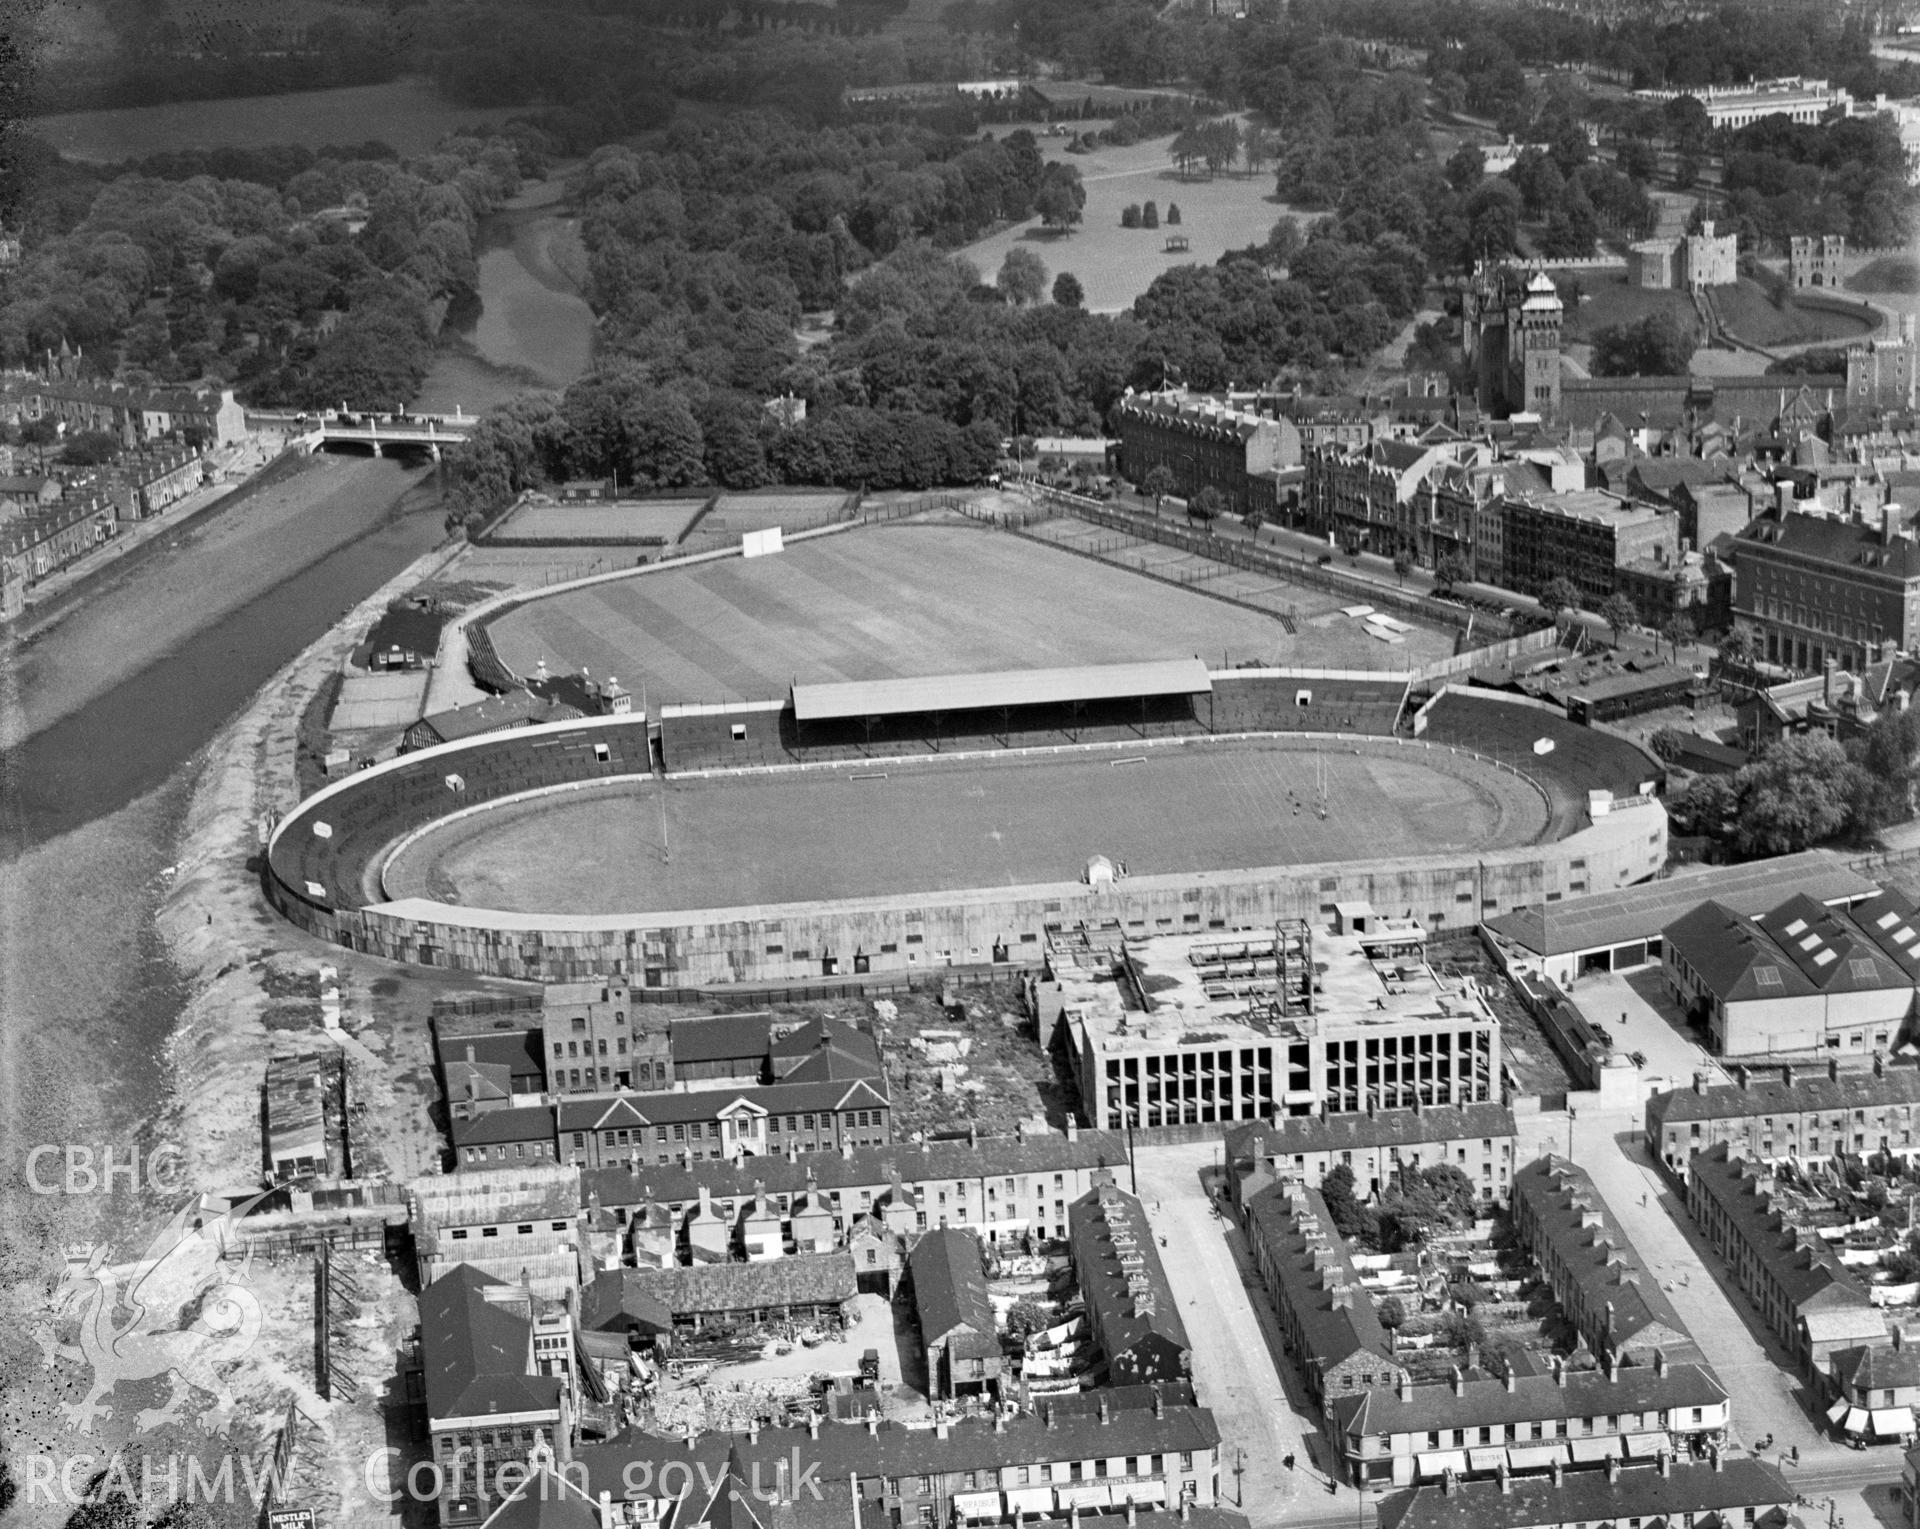 Digital copy of a black and white, oblique aerial photograph of Cardiff Arms Park, Cardiff. The photograph shows the view from the South East, showing Temperance Town in the foreground before its demolition by the Cardiff Corporation in 1937.